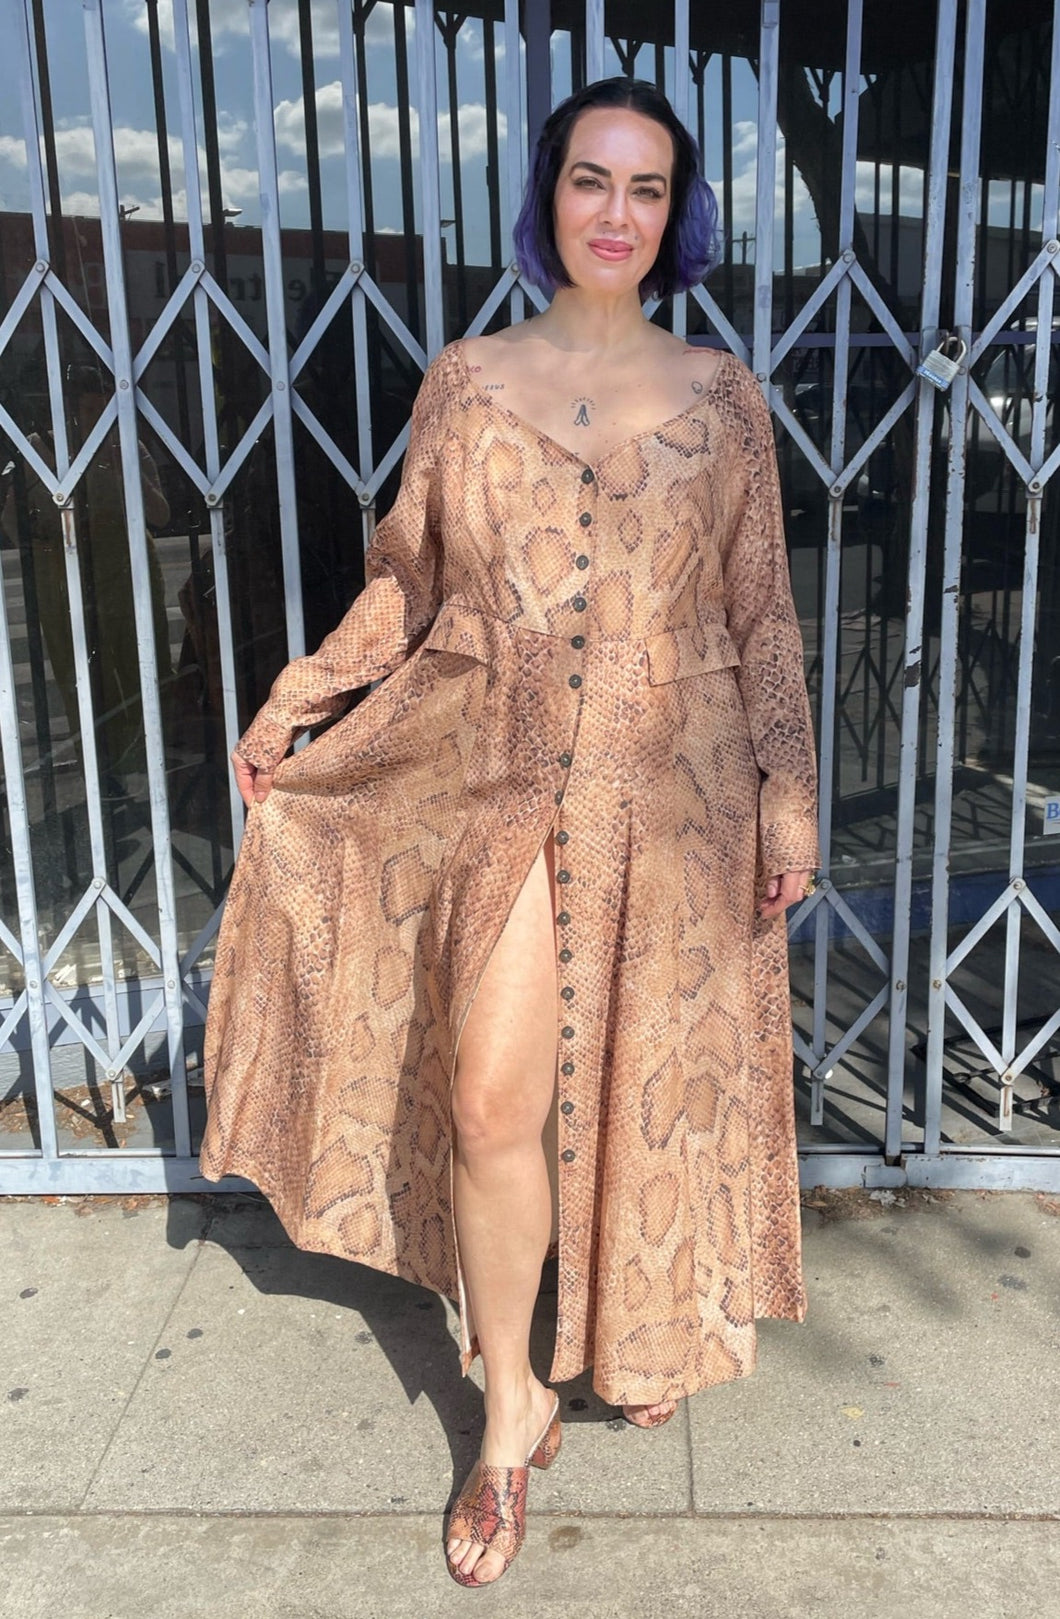 Full-body front view showing off the slit of a size 12 Mara Hoffman tan, brown, and white snake print button-up maxi dress with hip pocket details styled with snake print heels on a size 10 model. The photo is taken outside in natural lighting.